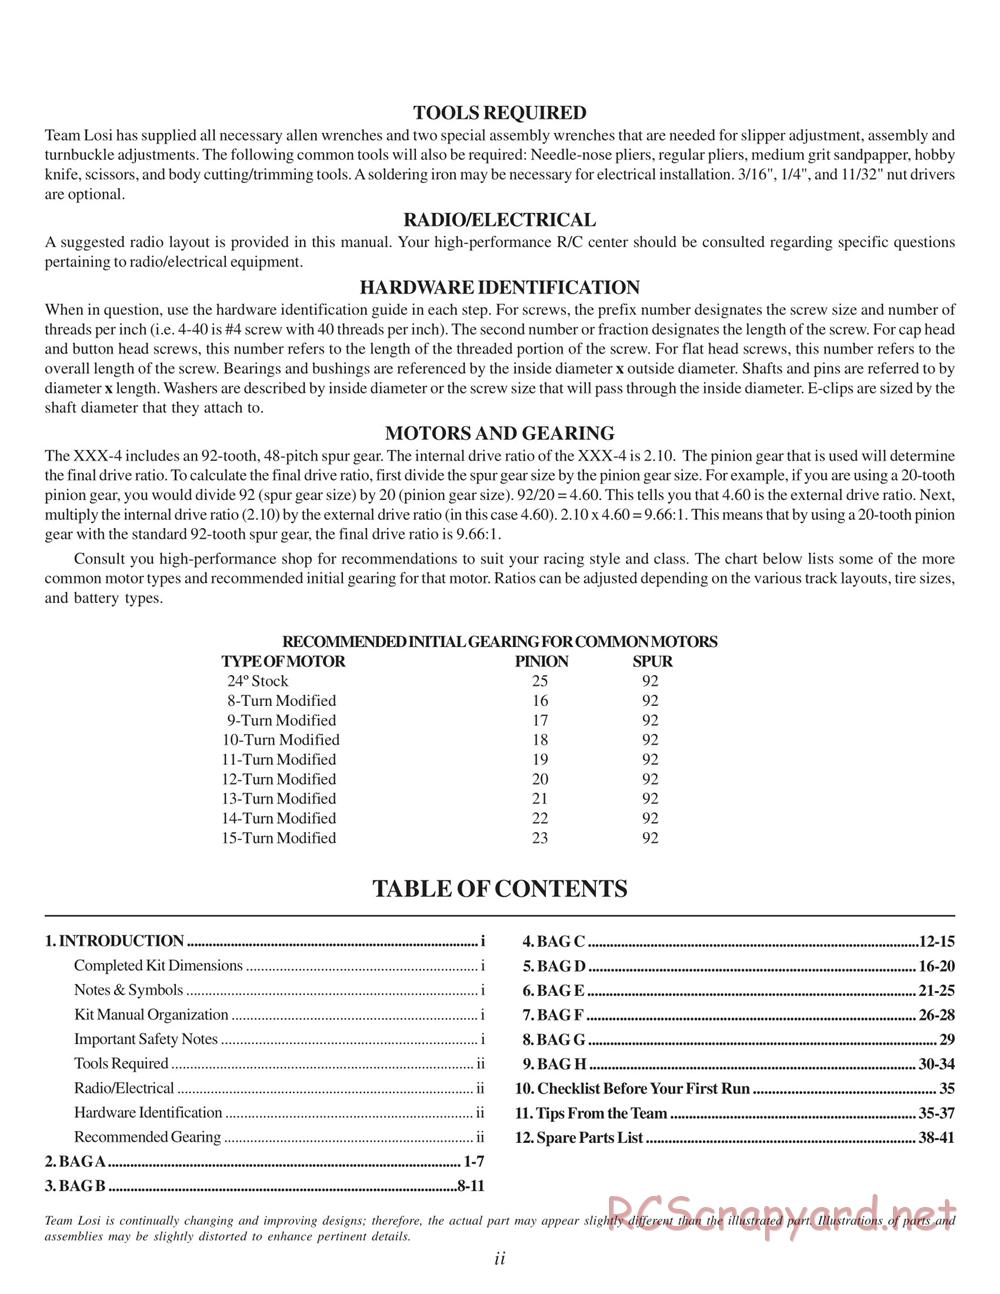 Team Losi - XXX4 - Manual - Page 3